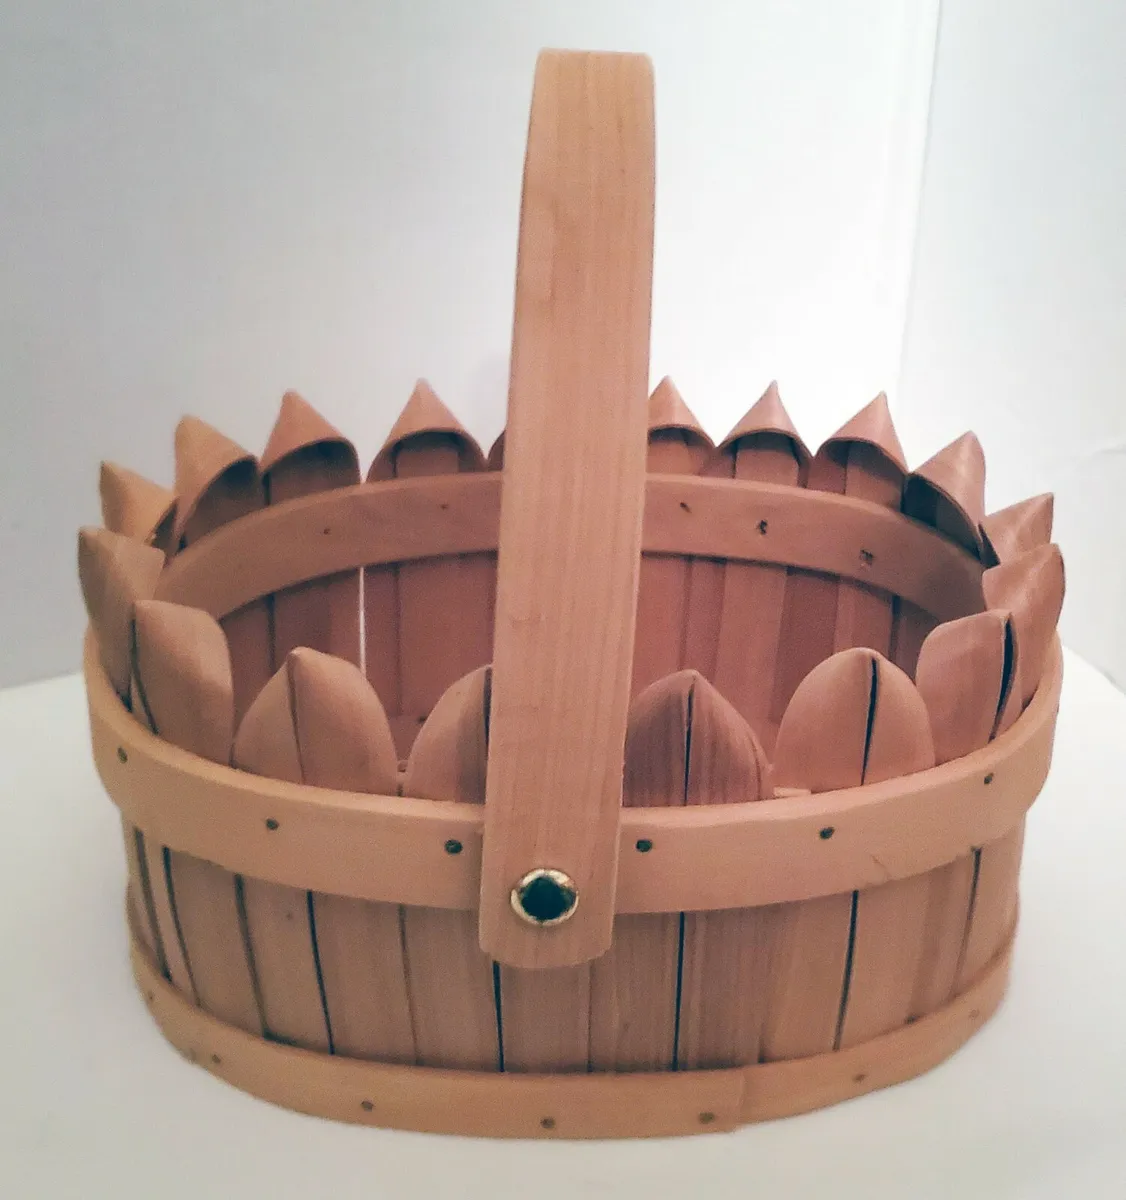 Small Oval Wood Basket With Wood Handle/Bottom and Decorative Edge Natural  Farm